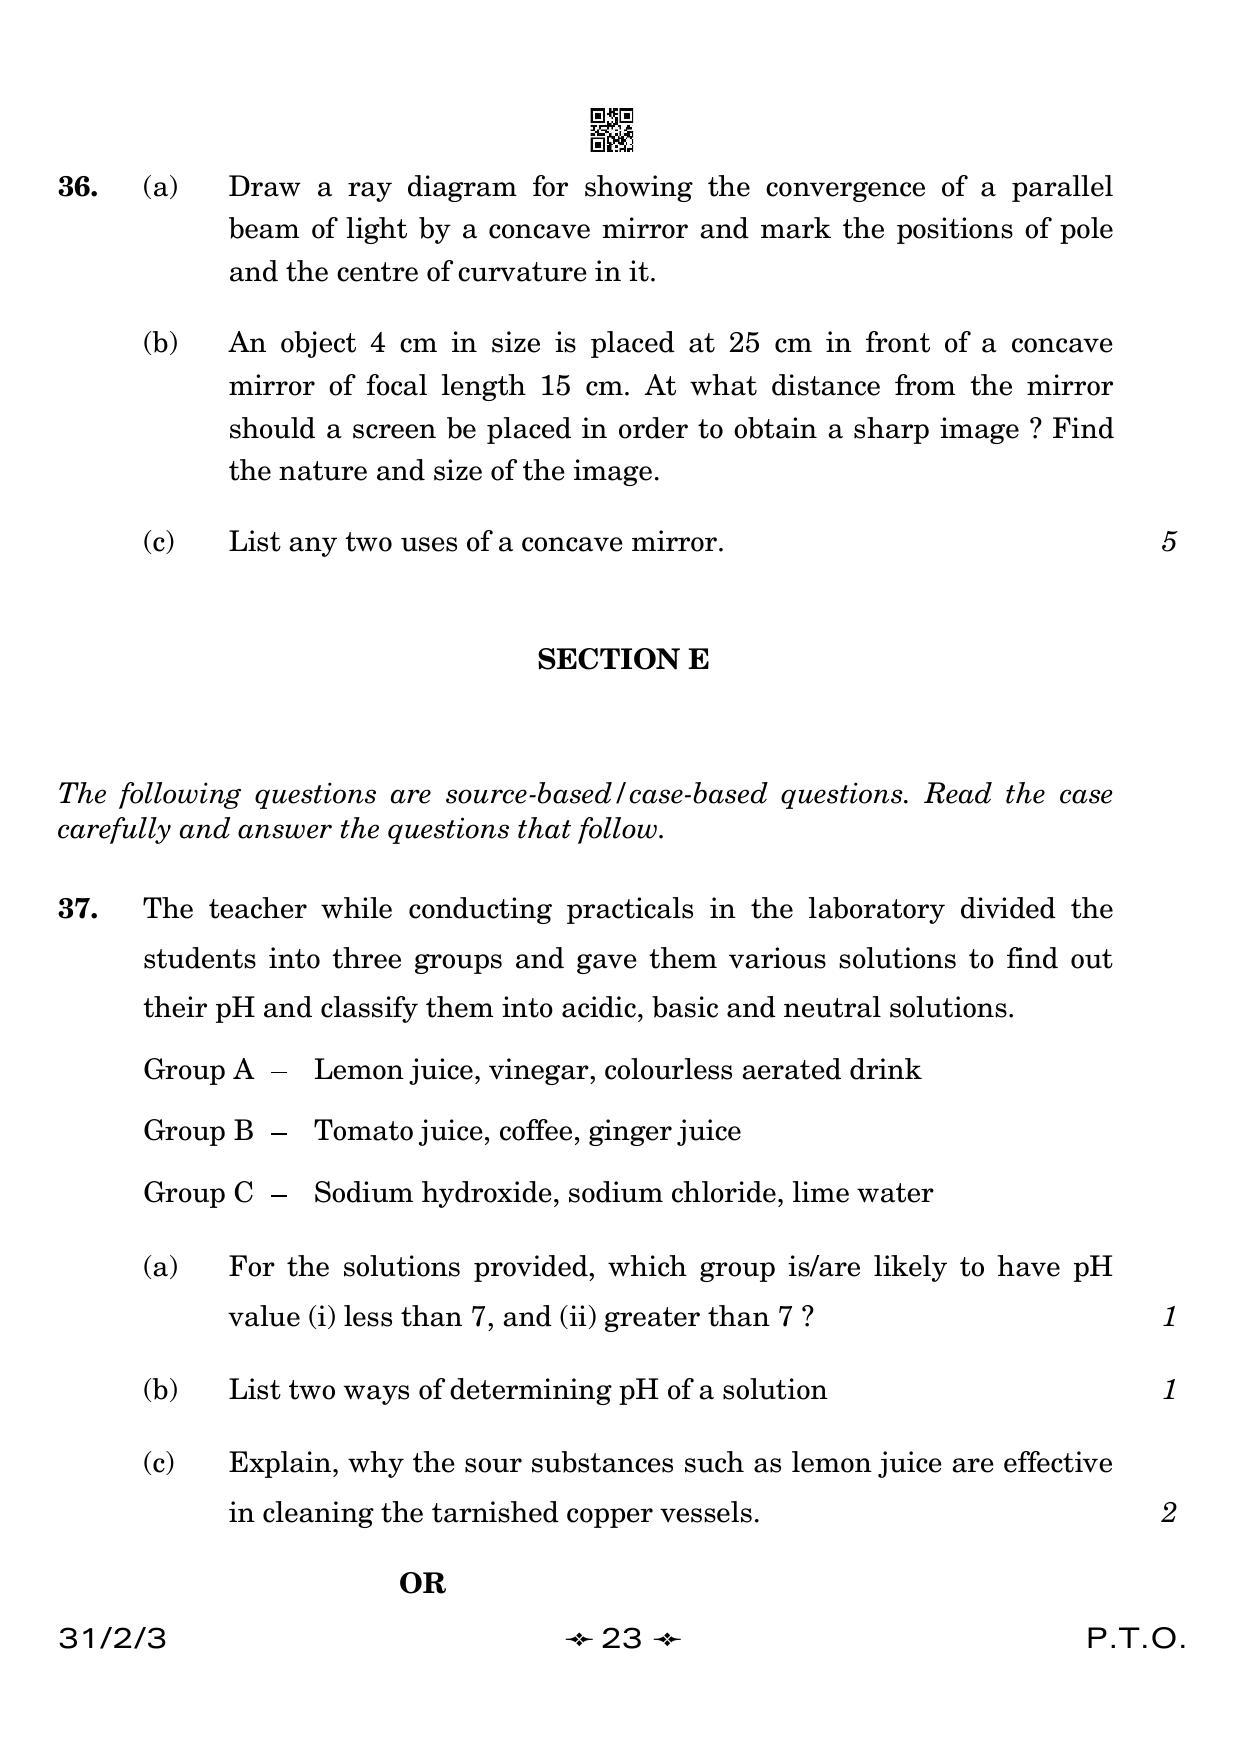 CBSE Class 10 31-2-3 Science 2023 Question Paper - Page 23